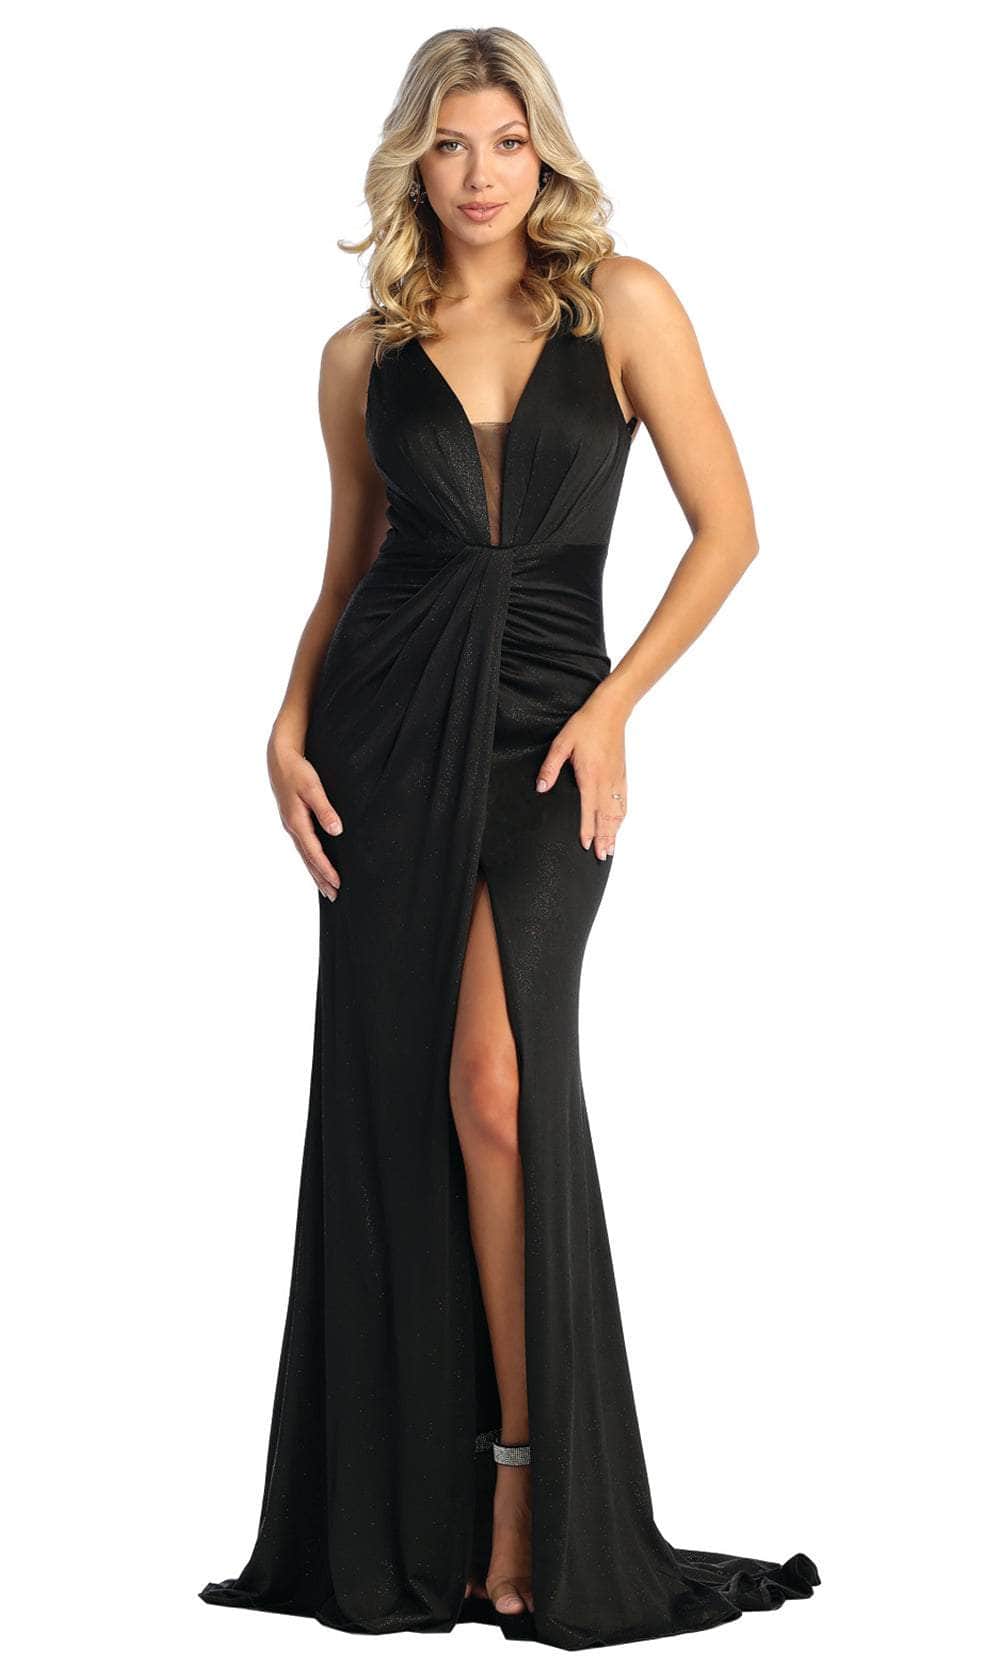 May Queen RQ7956 - Pleated High Slit Evening Dress